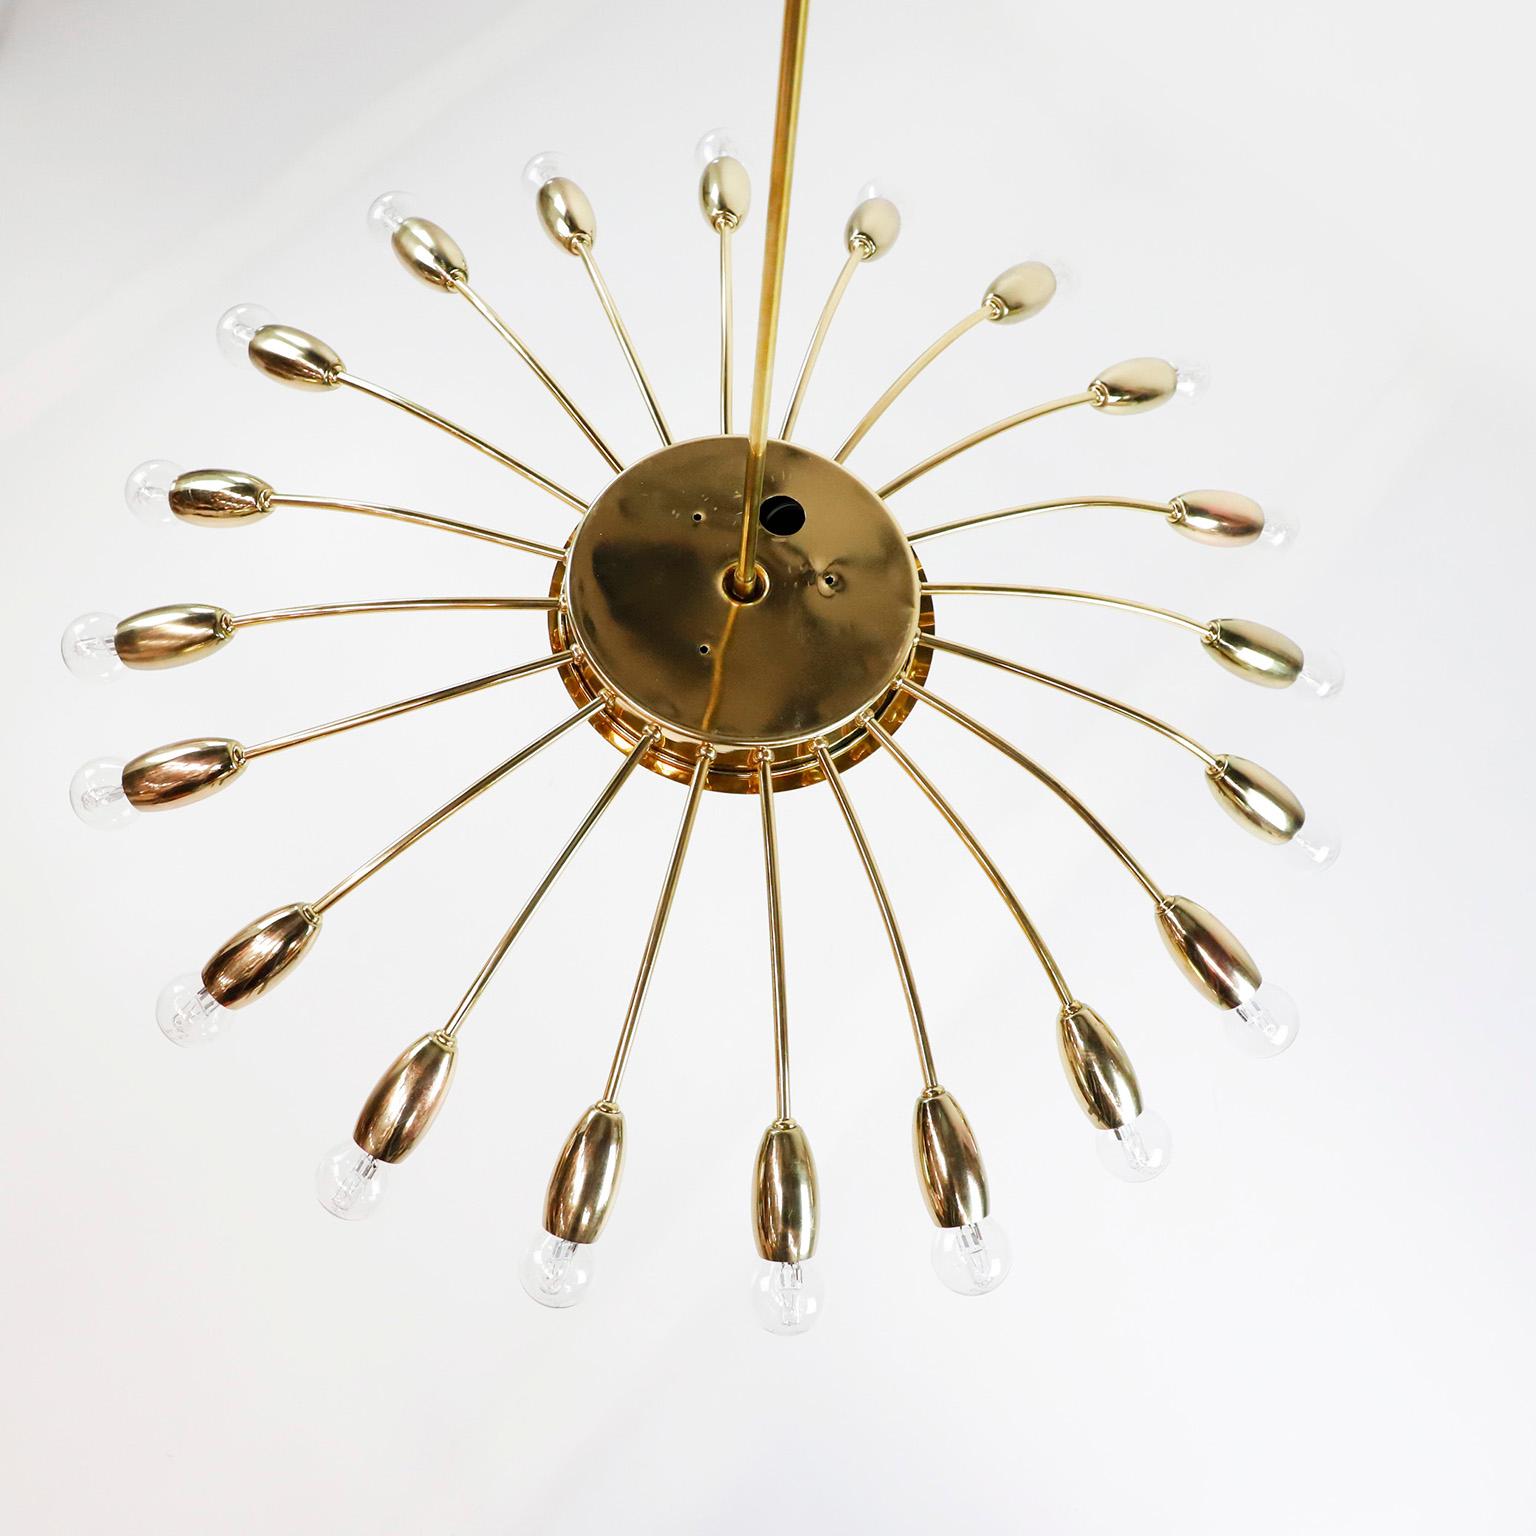 Circa 1950. We offer this Spider light chandelier with 20-light. Brass, rewired

The chandelier is in excellent original condition, carefully cleaned and rewired.